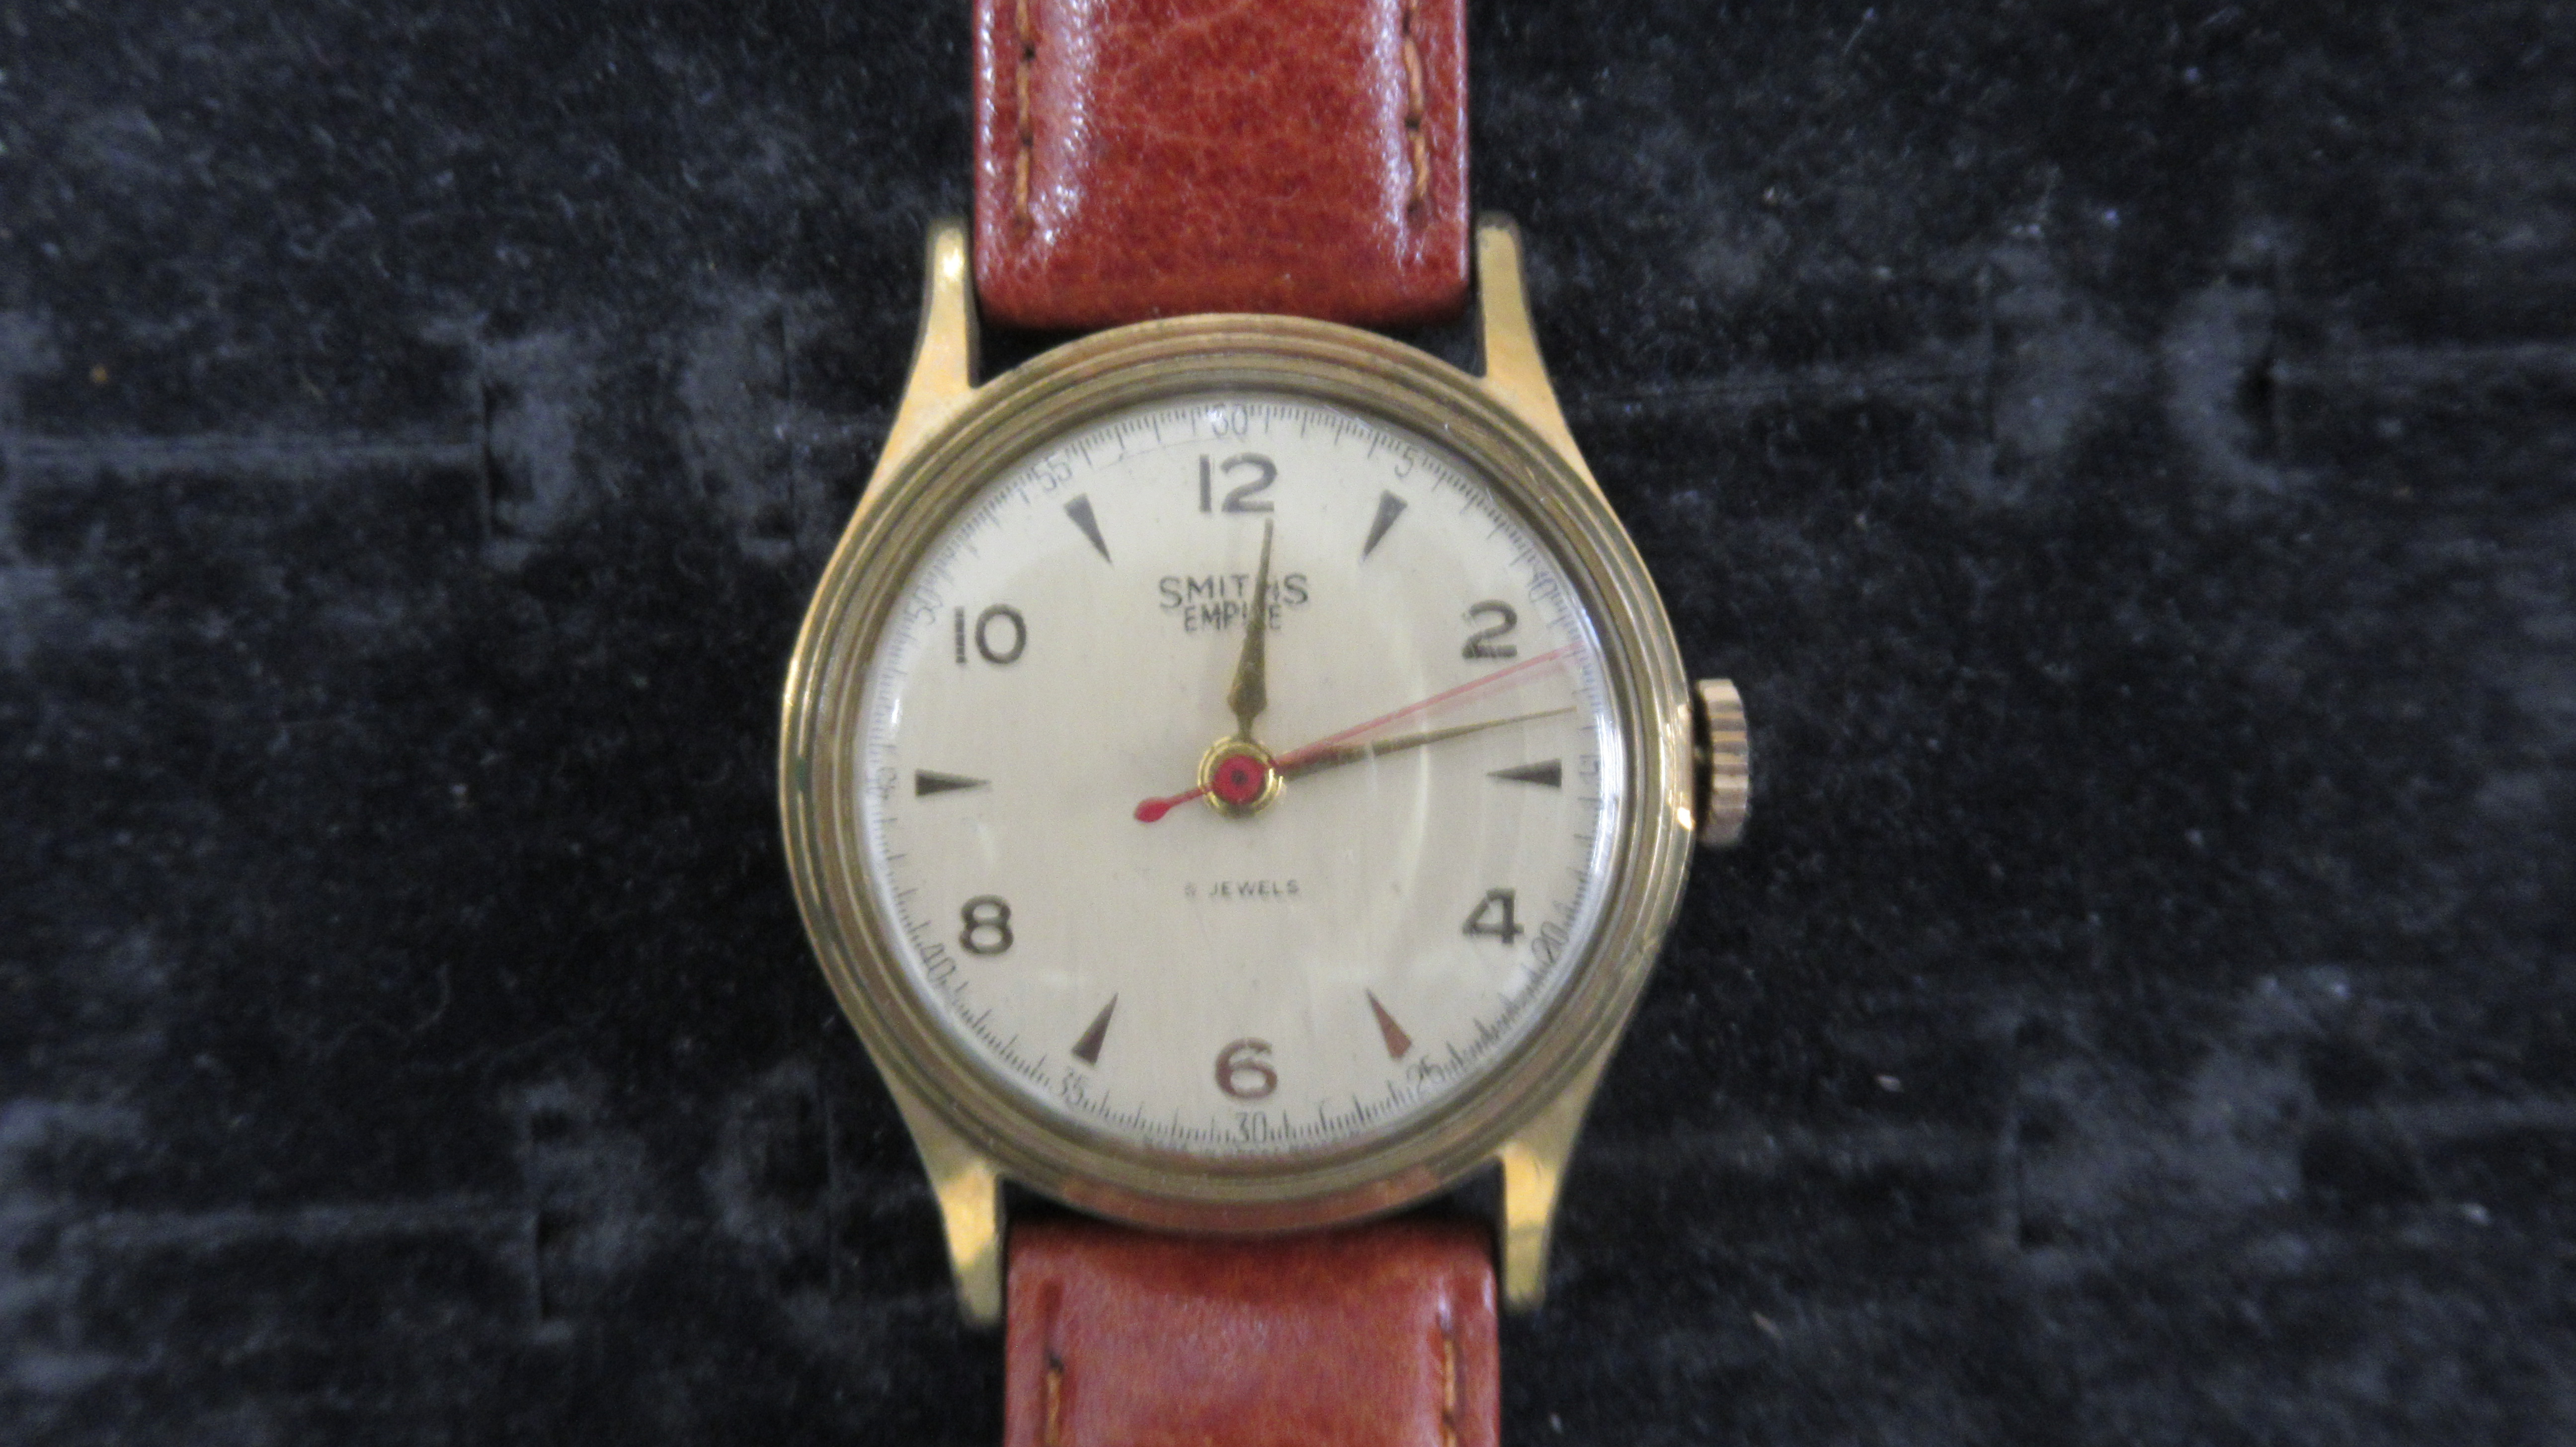 A Smiths Empire manual wind Gents watch on a leather strap, working in saleroom